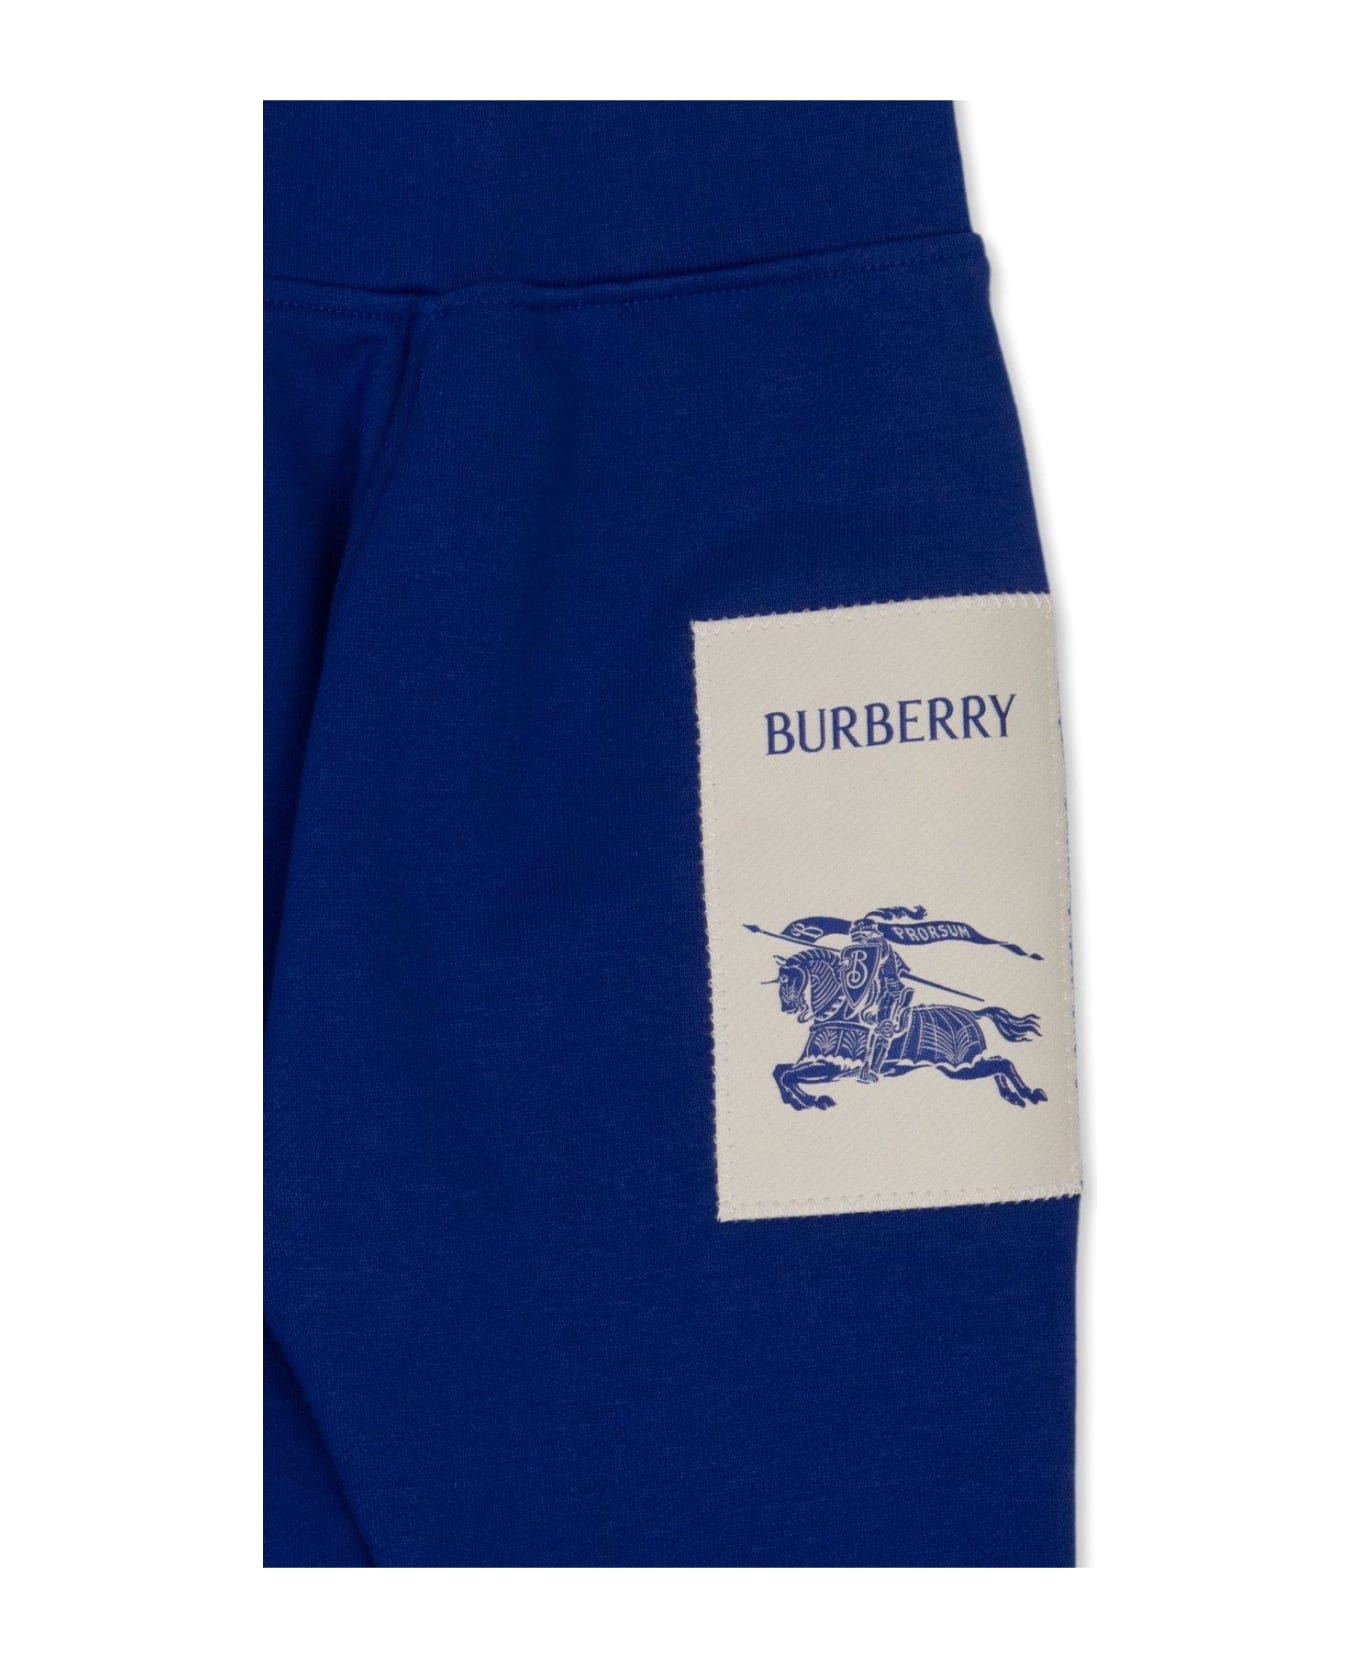 Burberry Equestrian Knight Motif Track Pants ボトムス